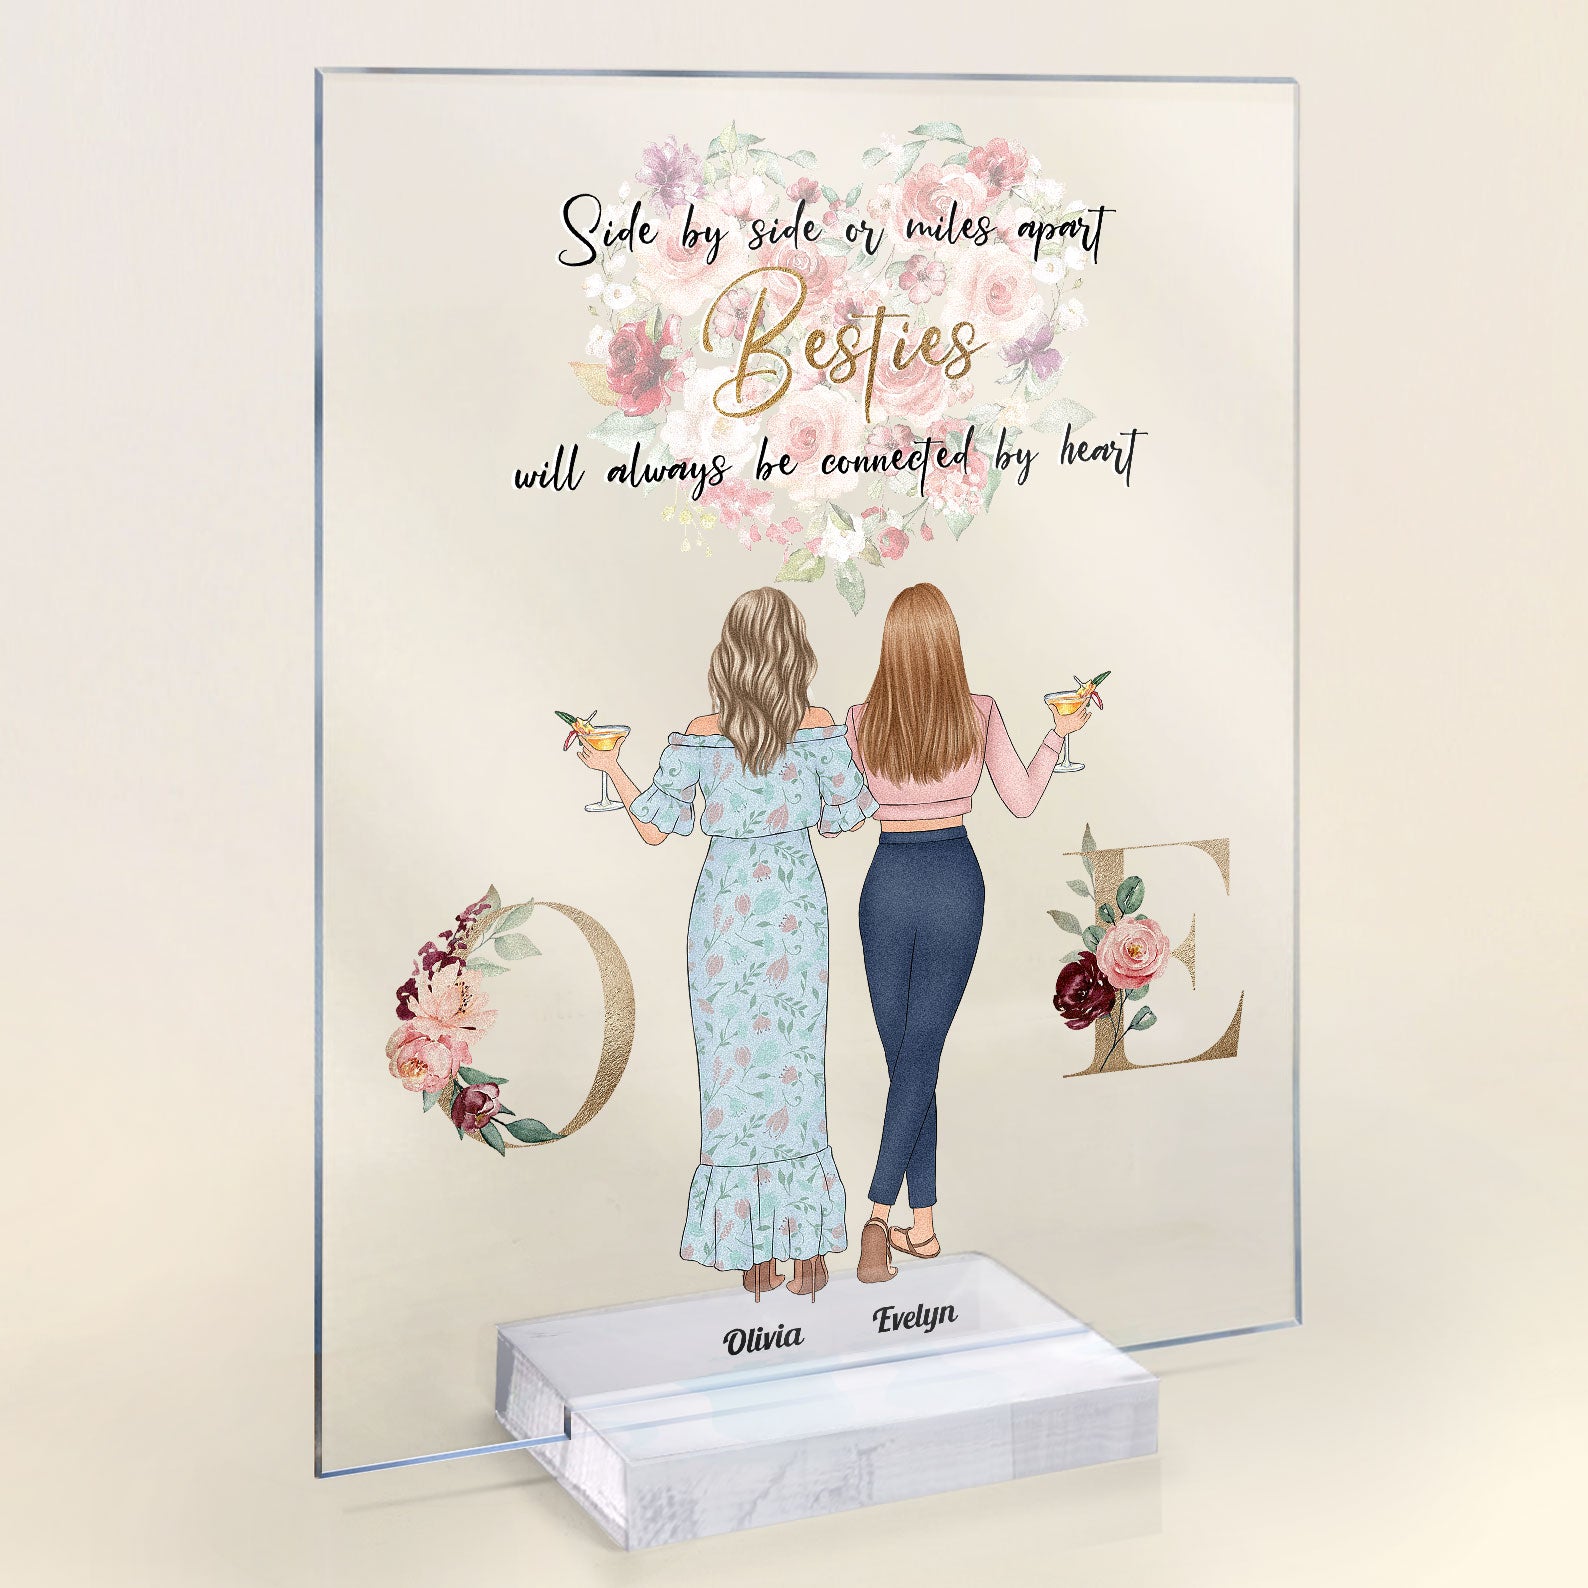 Will Always Be Connected By Heart - Personalized Acrylic Plaque - Birthday Missing Gift For Besties, Best Friends, BFF, Soul Sisters